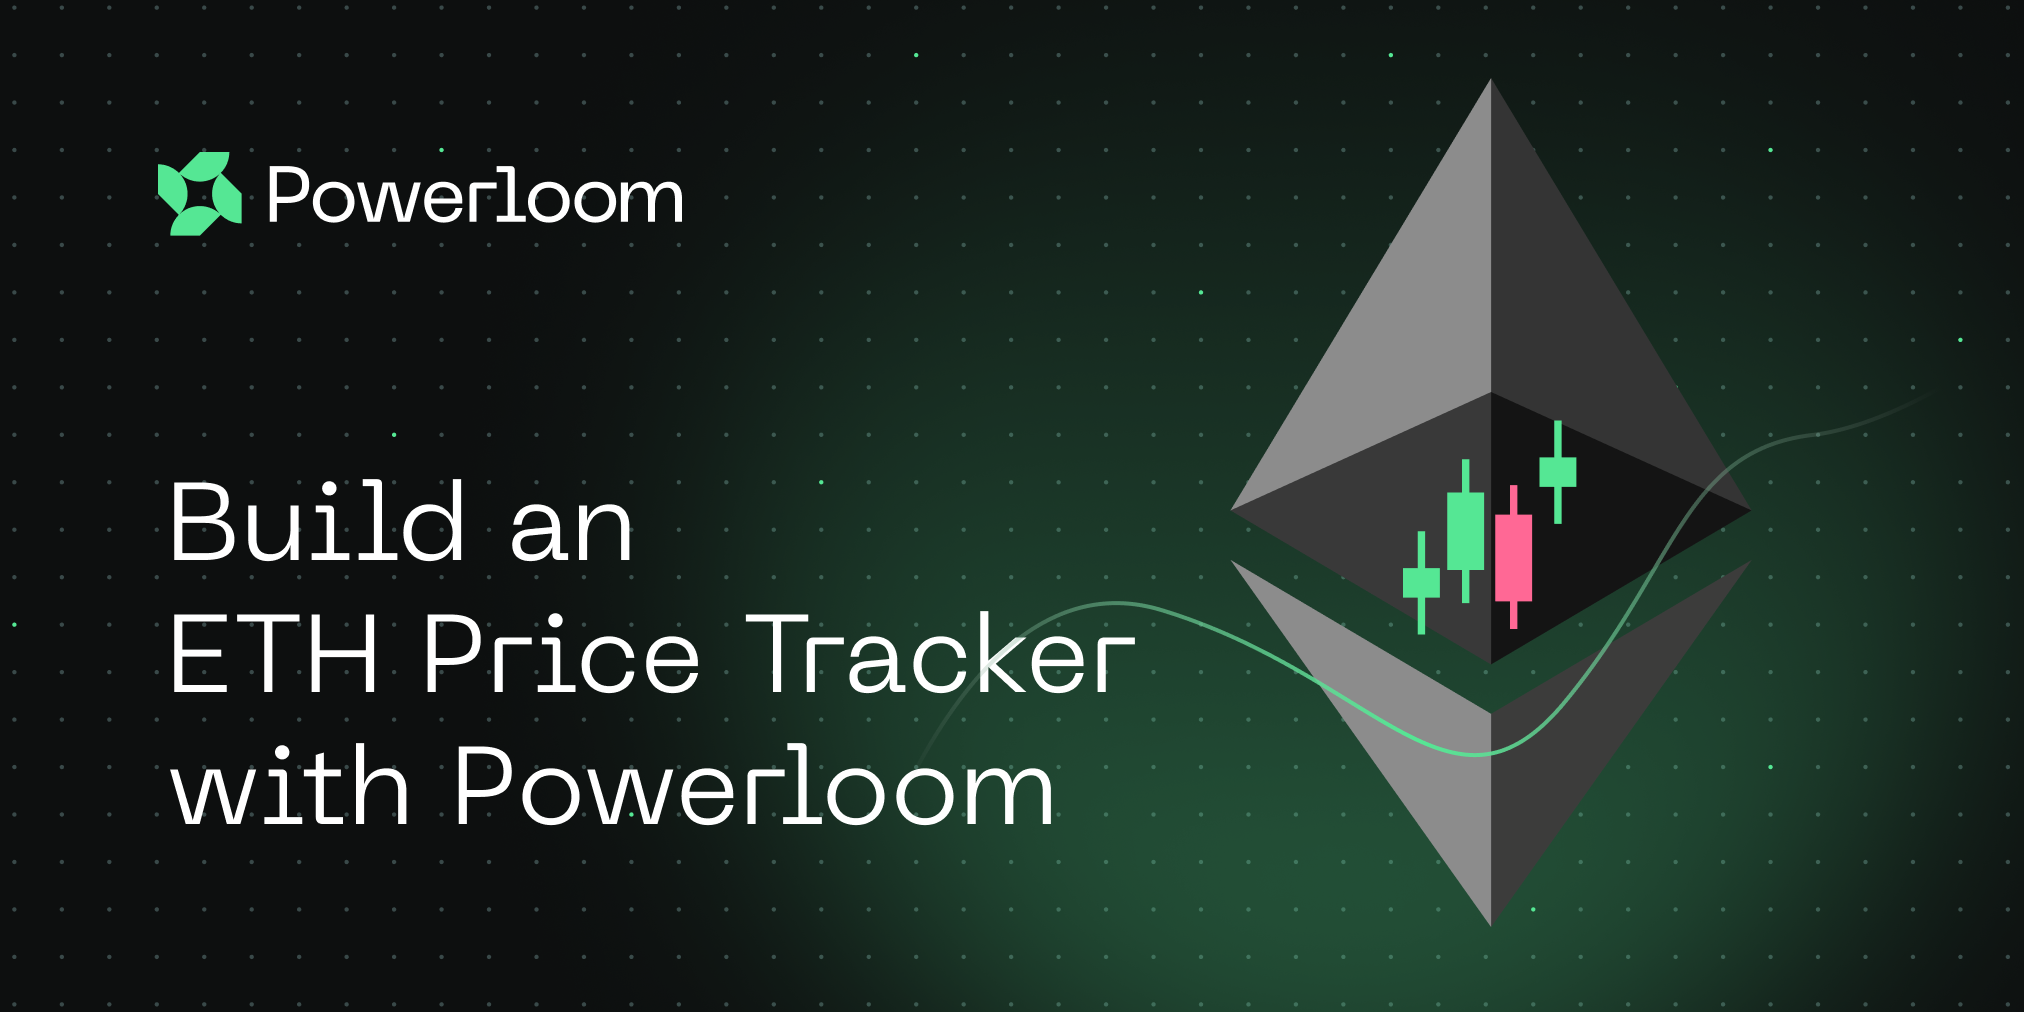 Build an ETH Price Tracker with Powerloom